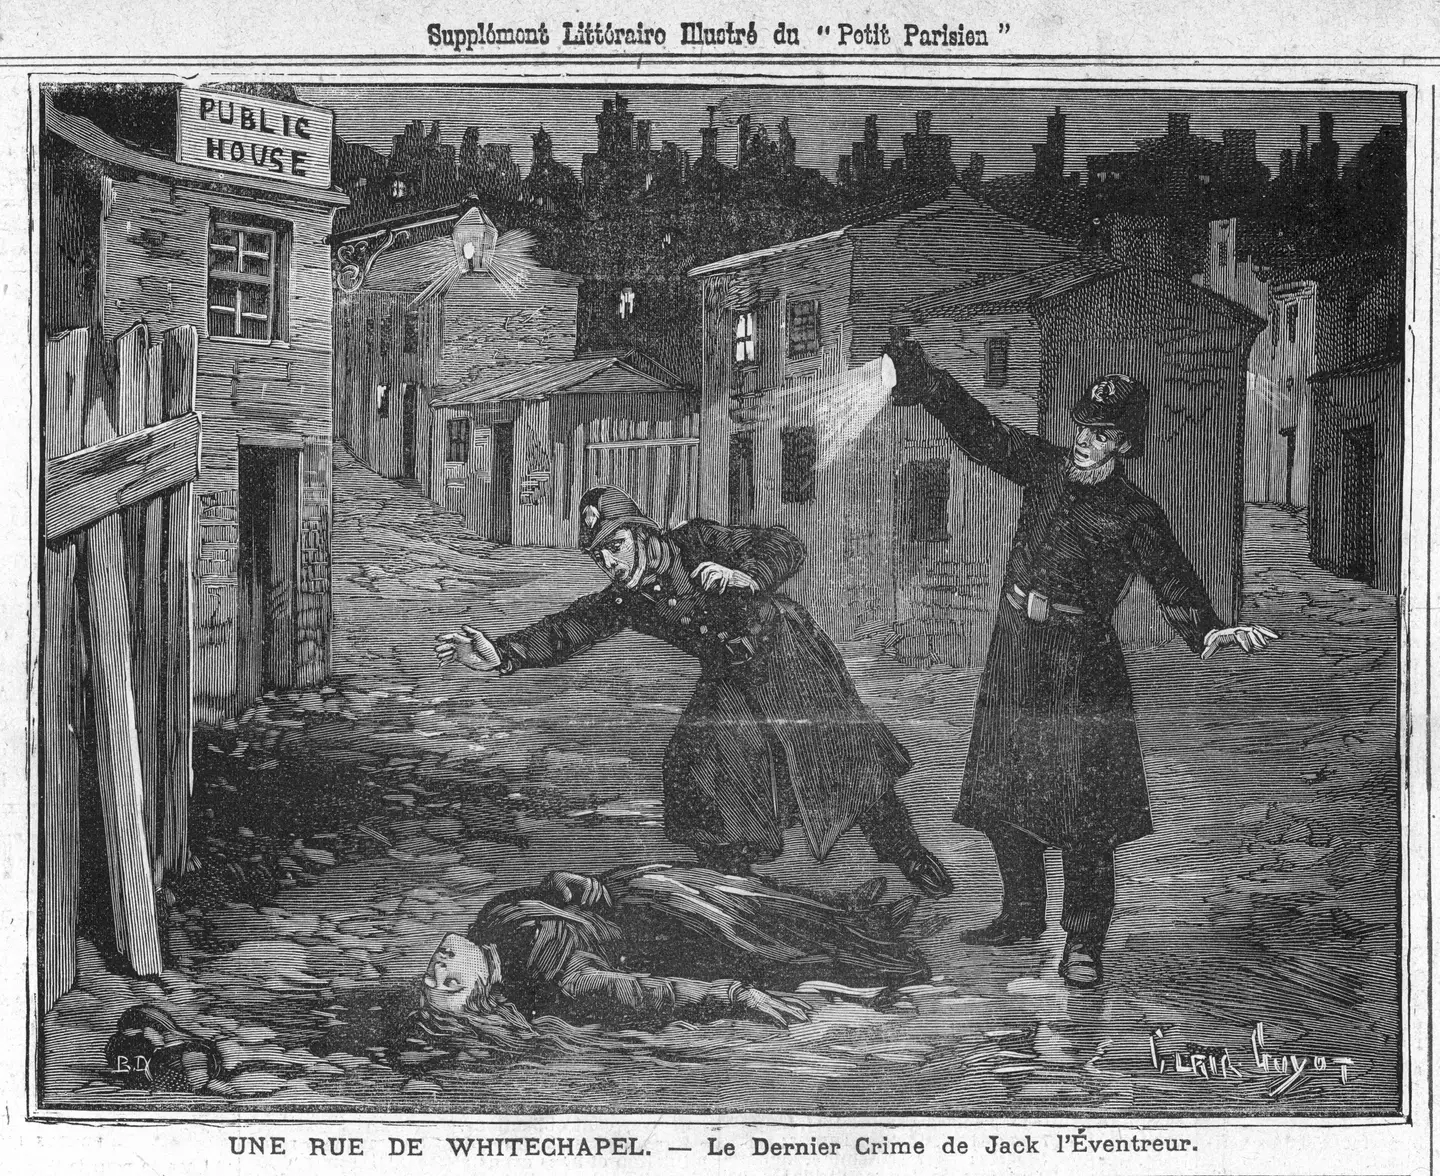 A newspaper cutting about one of the murders.